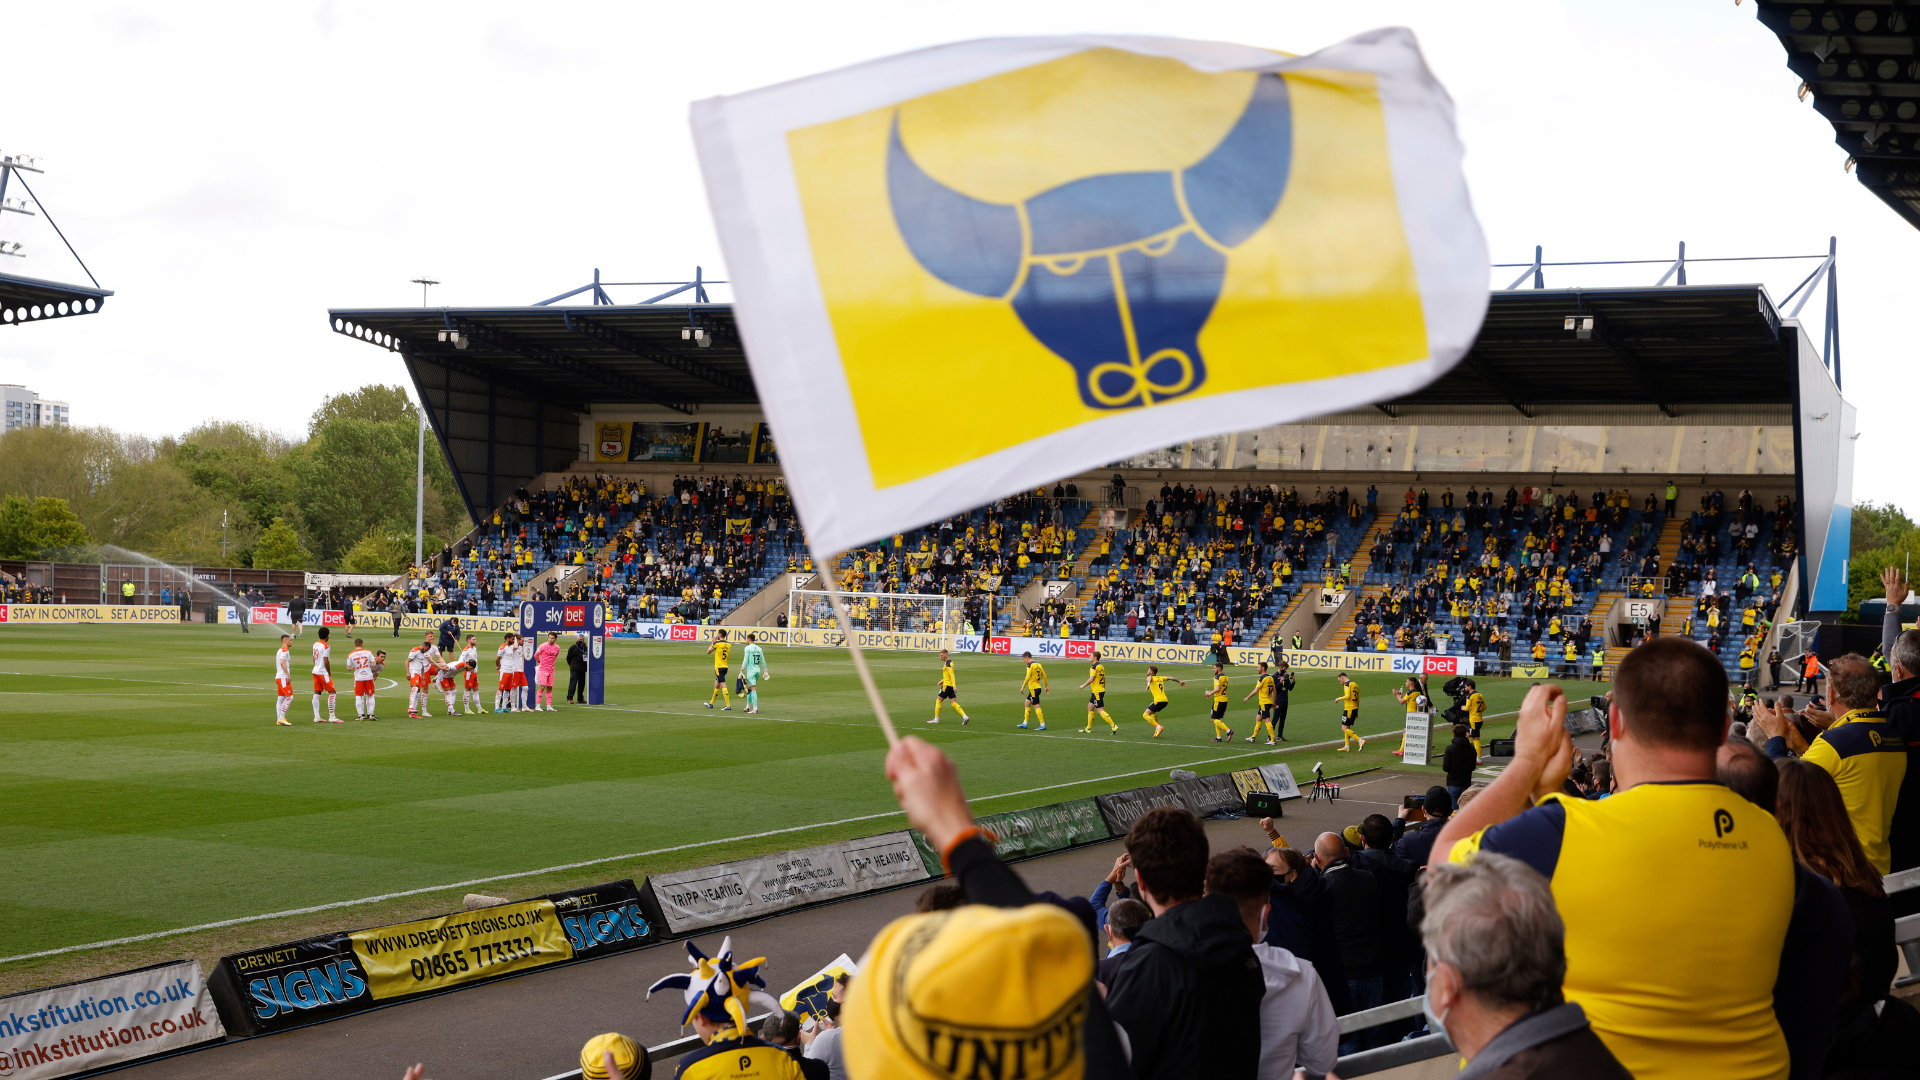 Oxford United general view